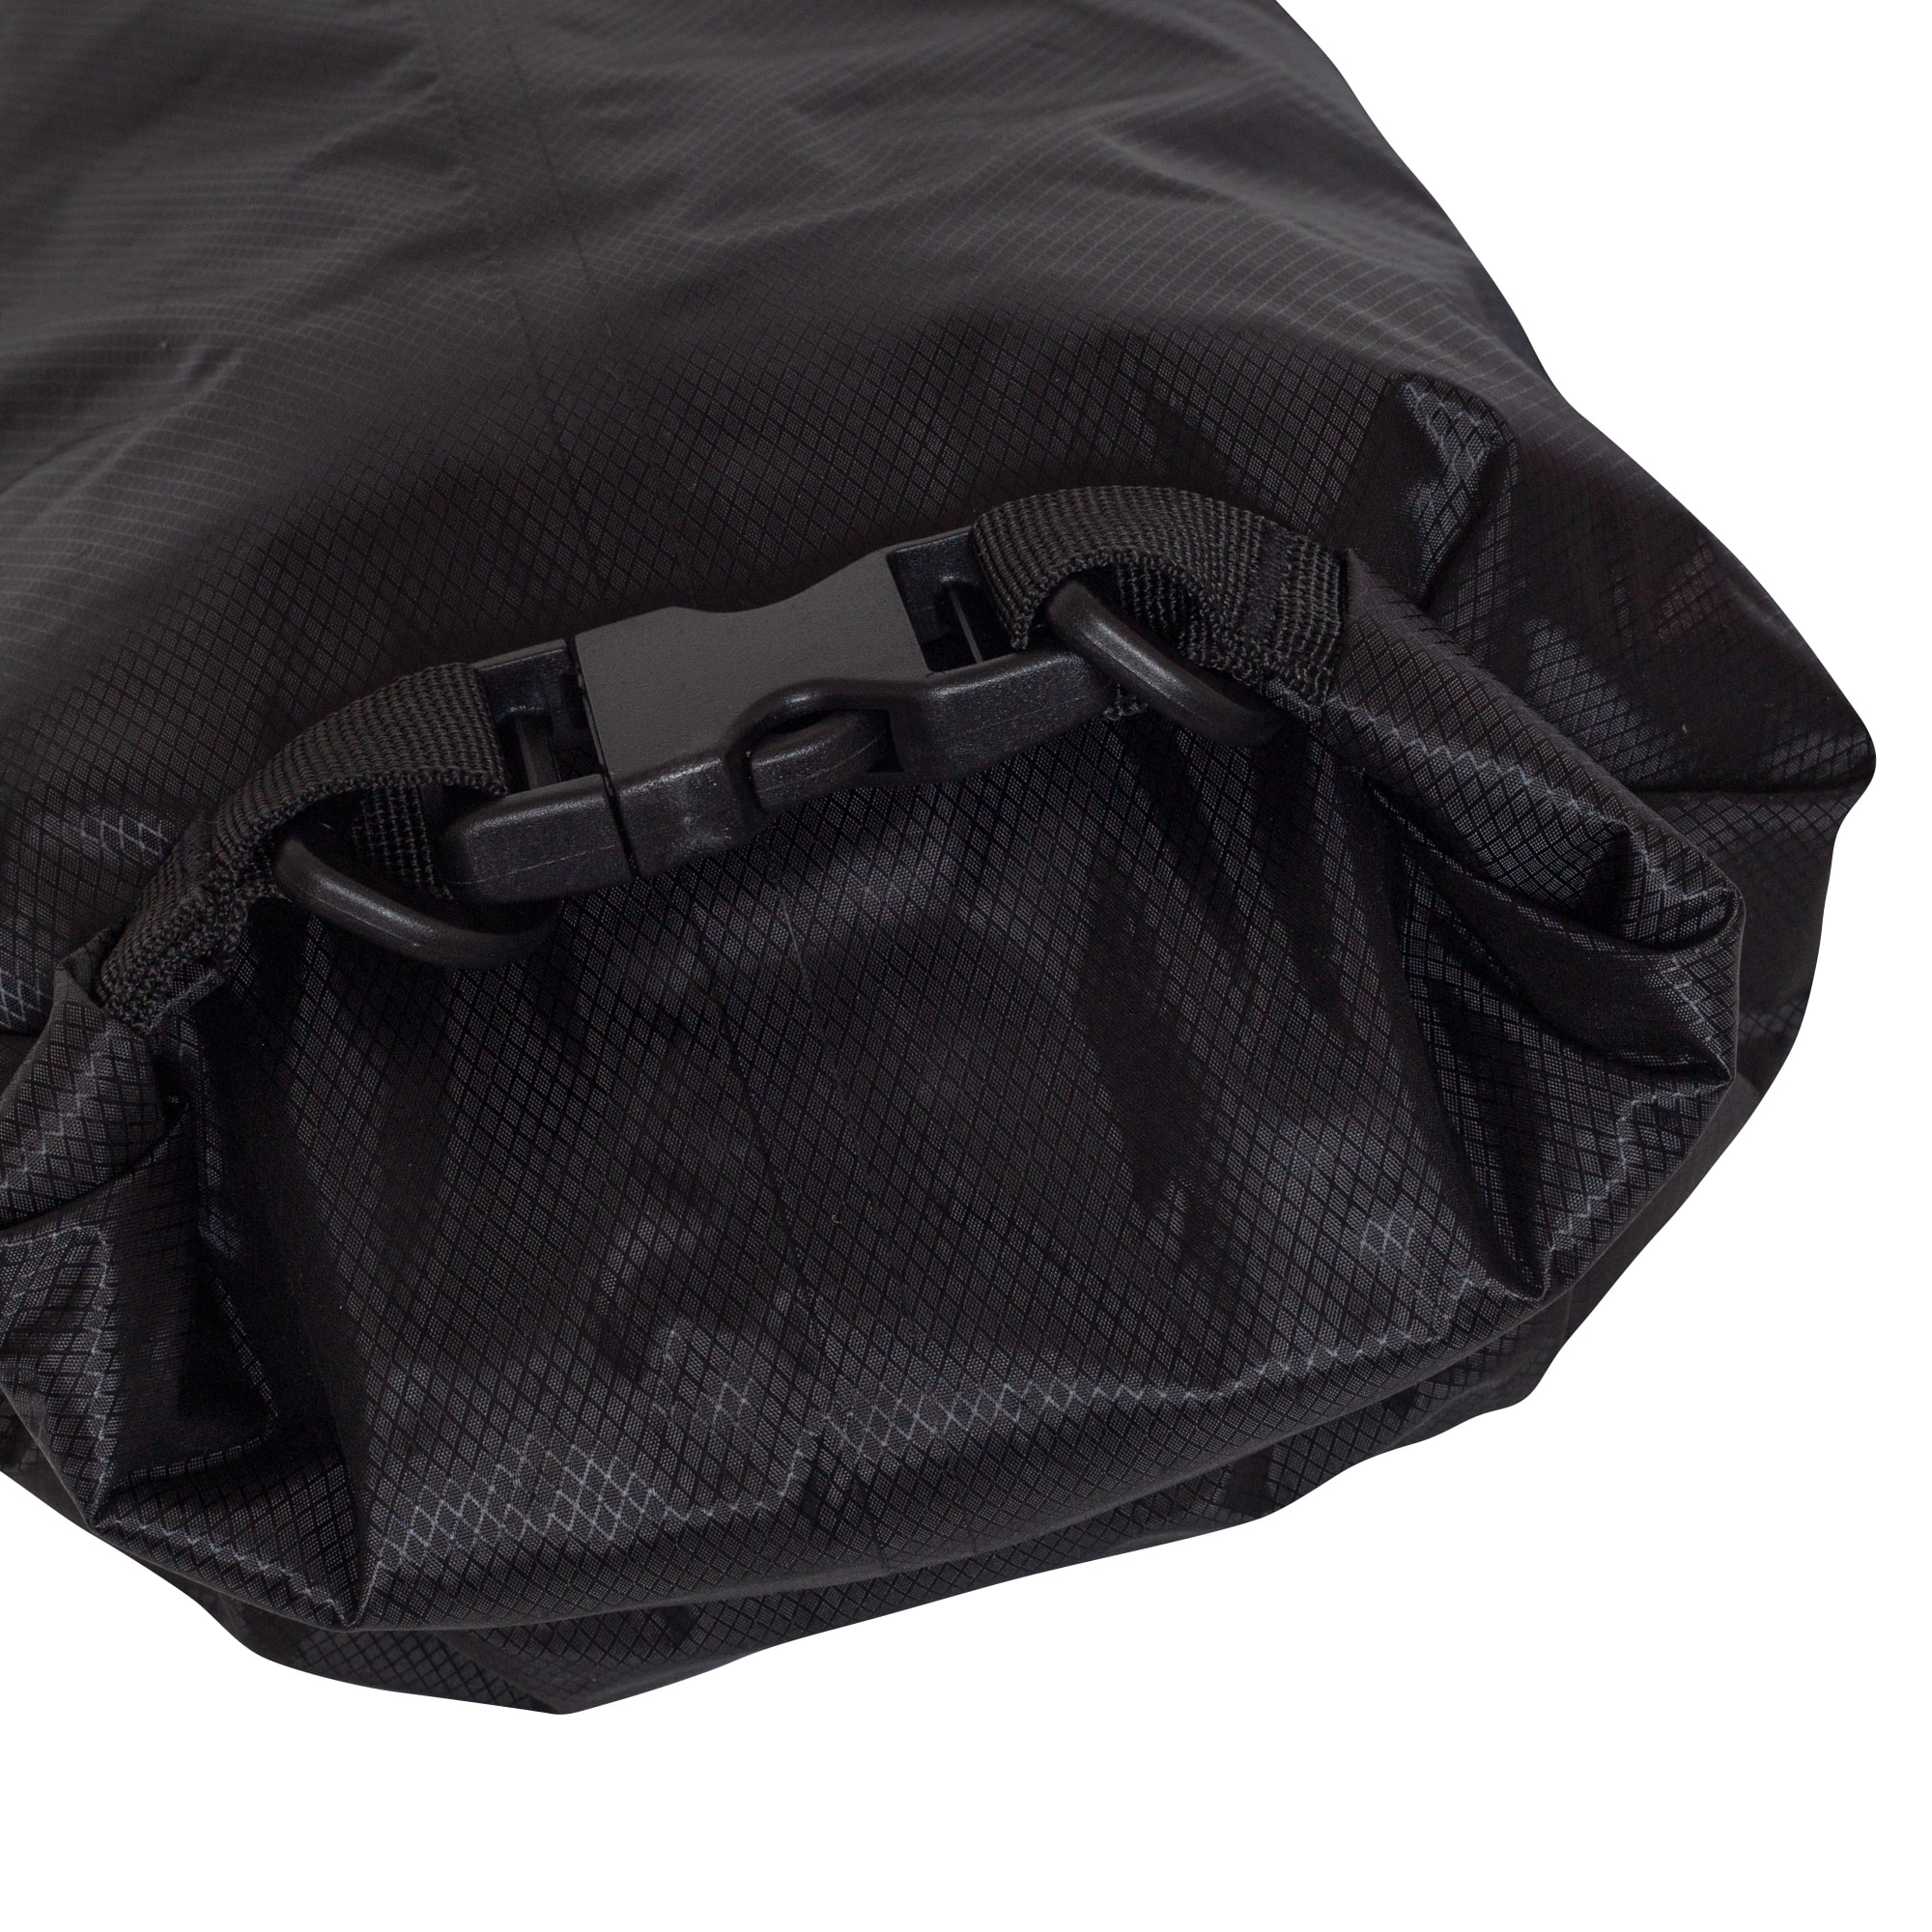 GB Ultras Roll Top Dry Bag 10L - GBultras Weather protection